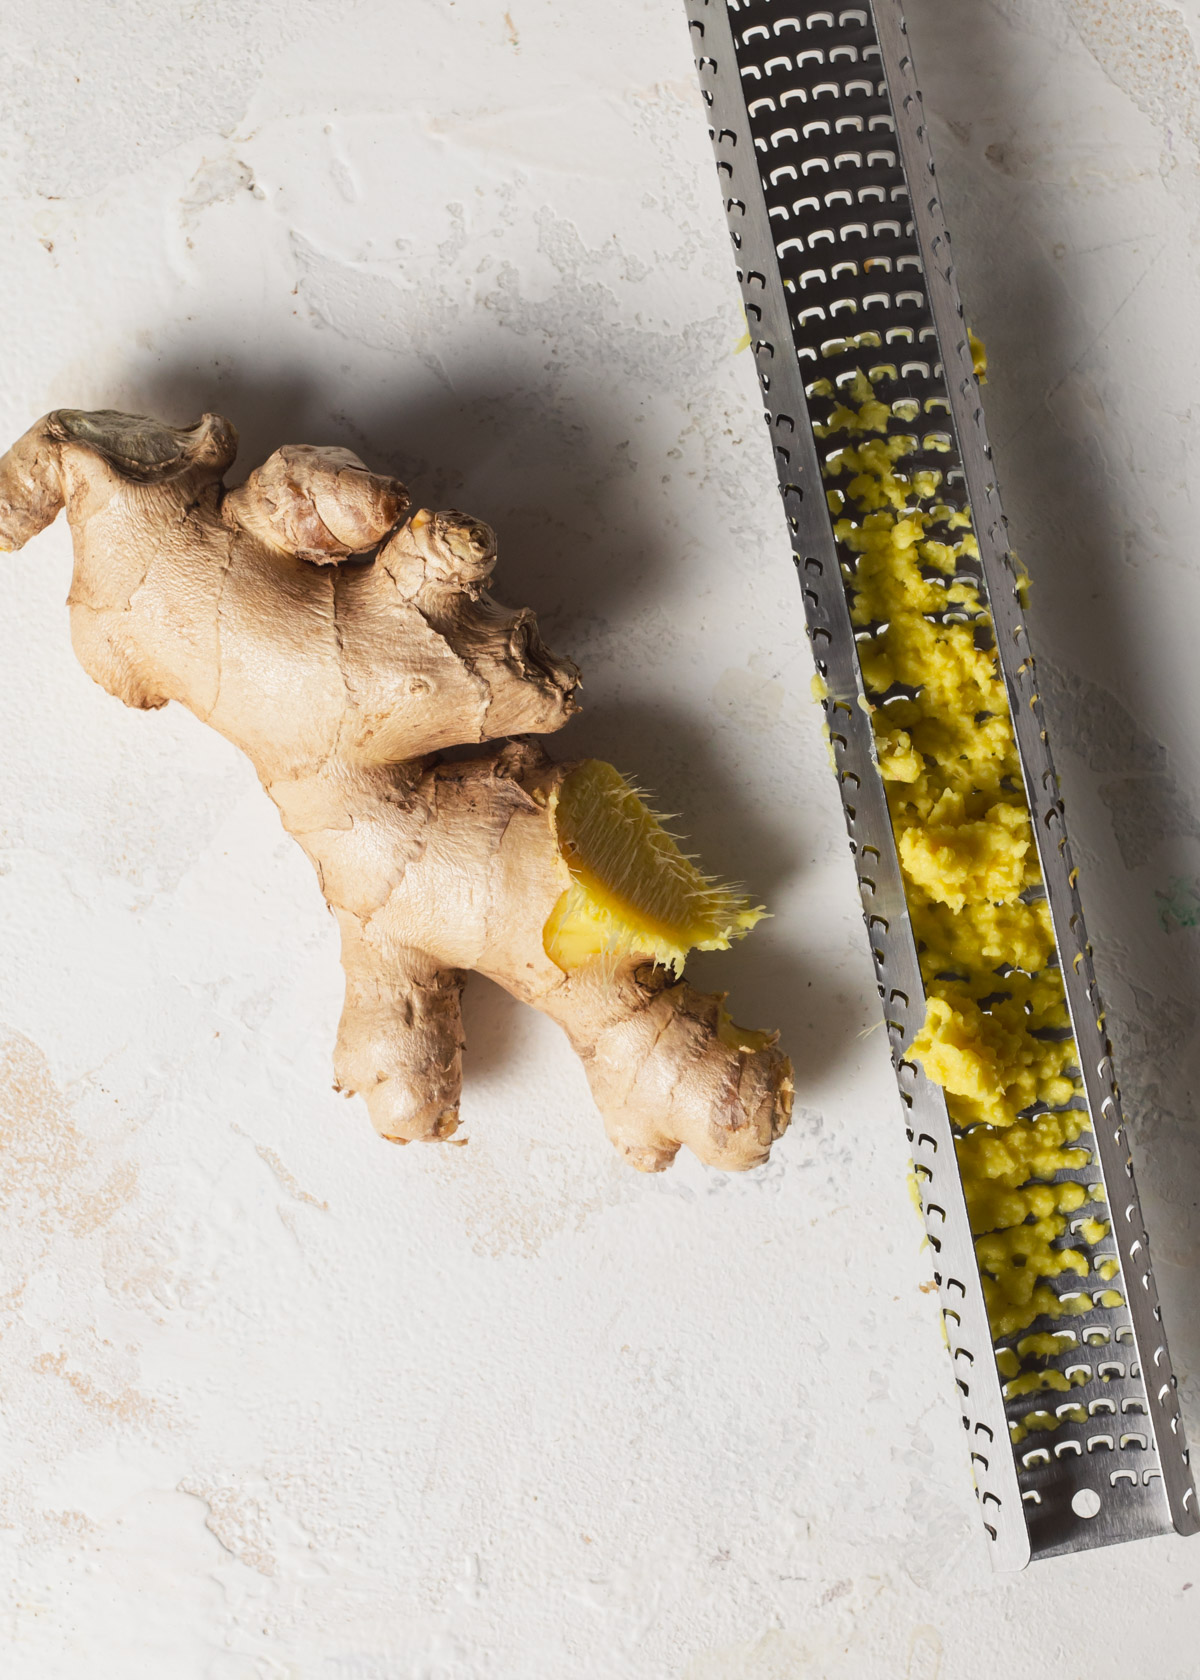 Grating fresh ginger with a microplane